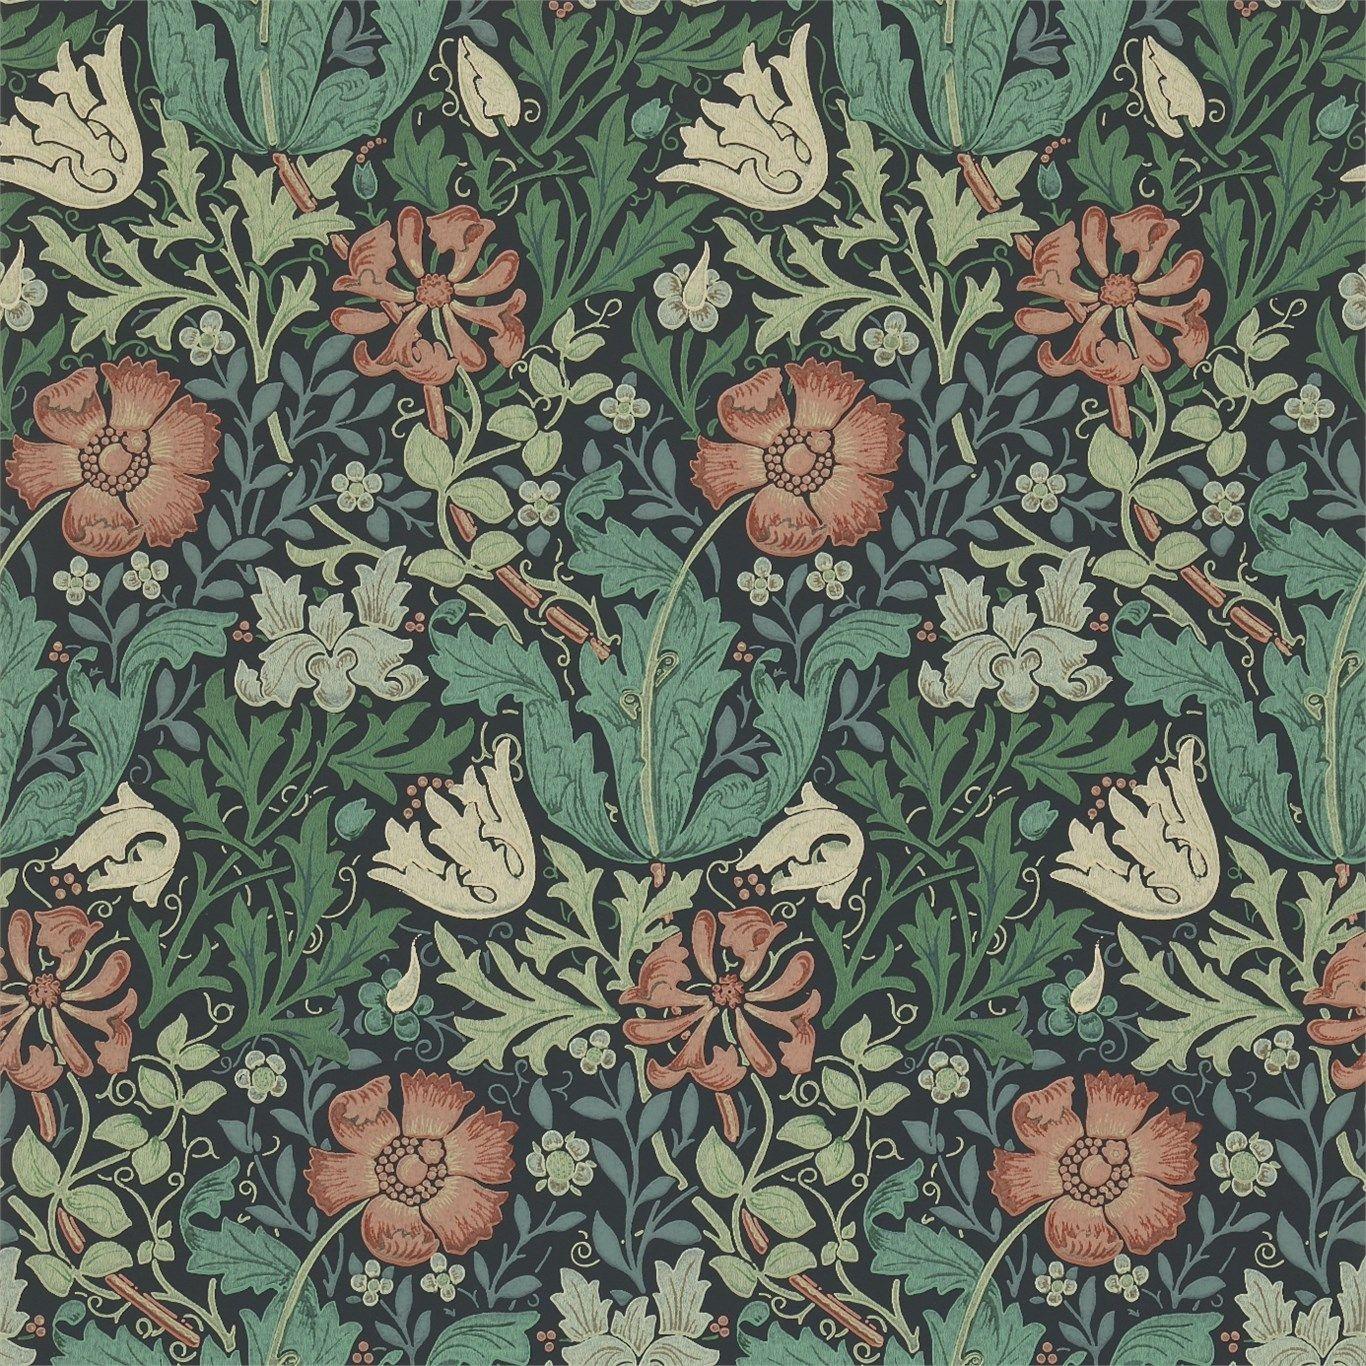 The Original Morris & Co and crafts, fabrics and wallpaper